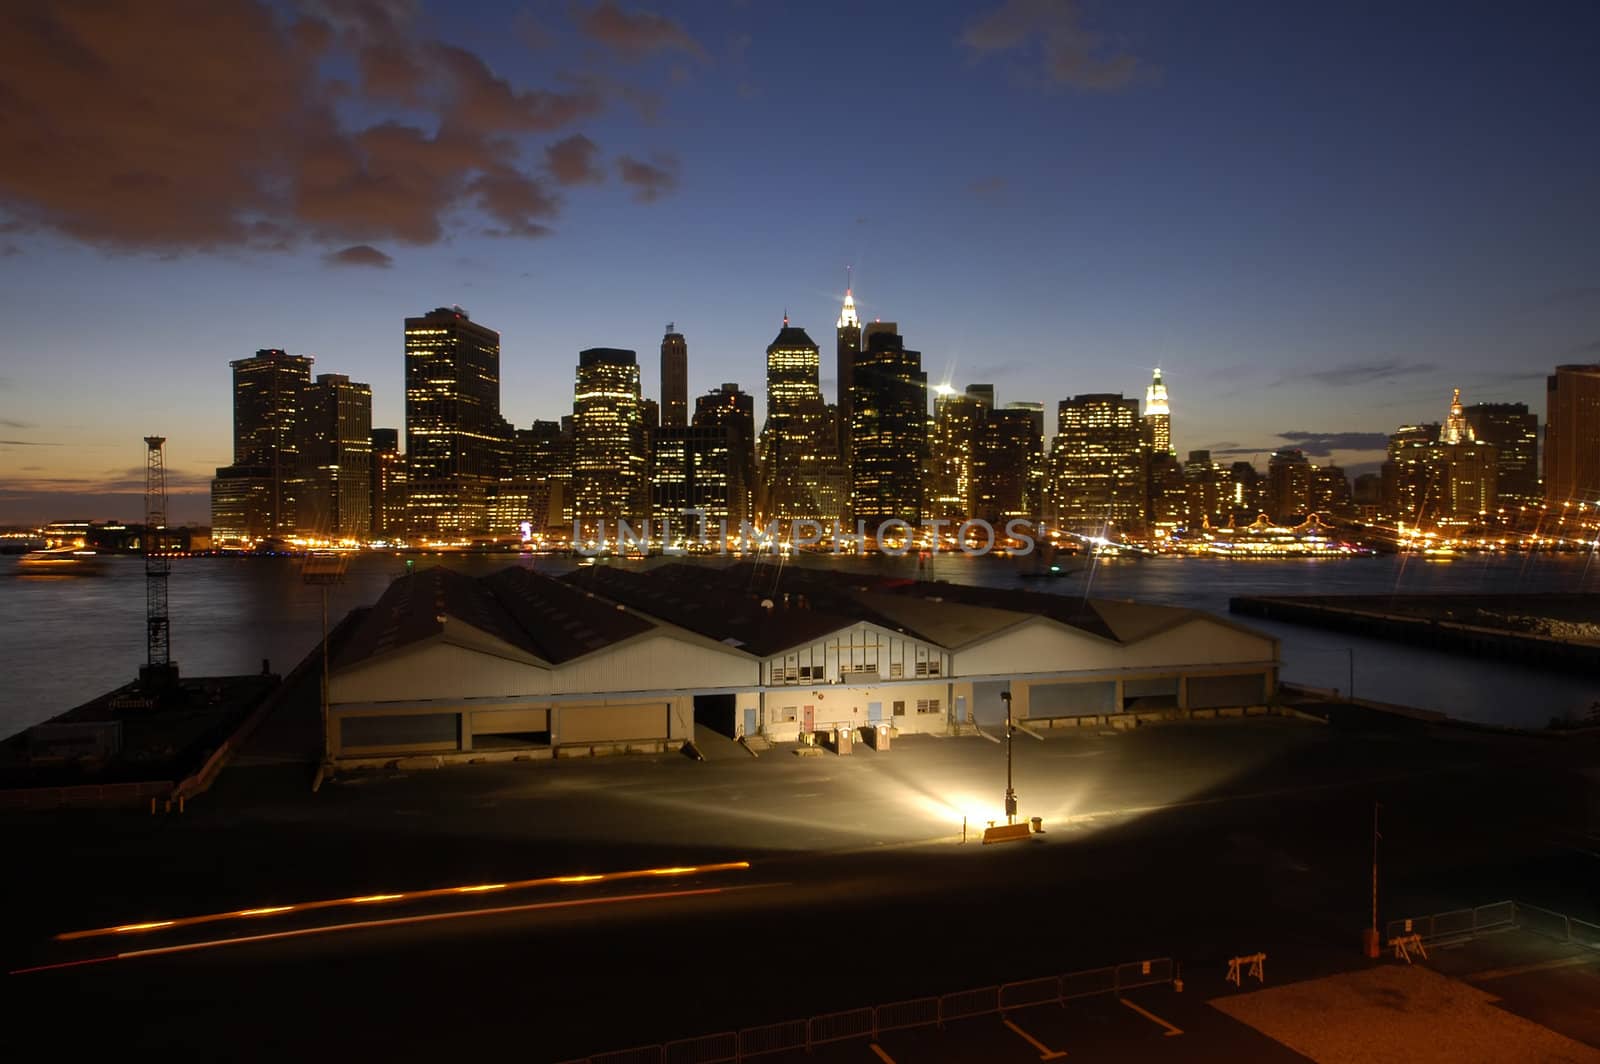 night photo of lower manhattan, some brooklyn warehouse in front,